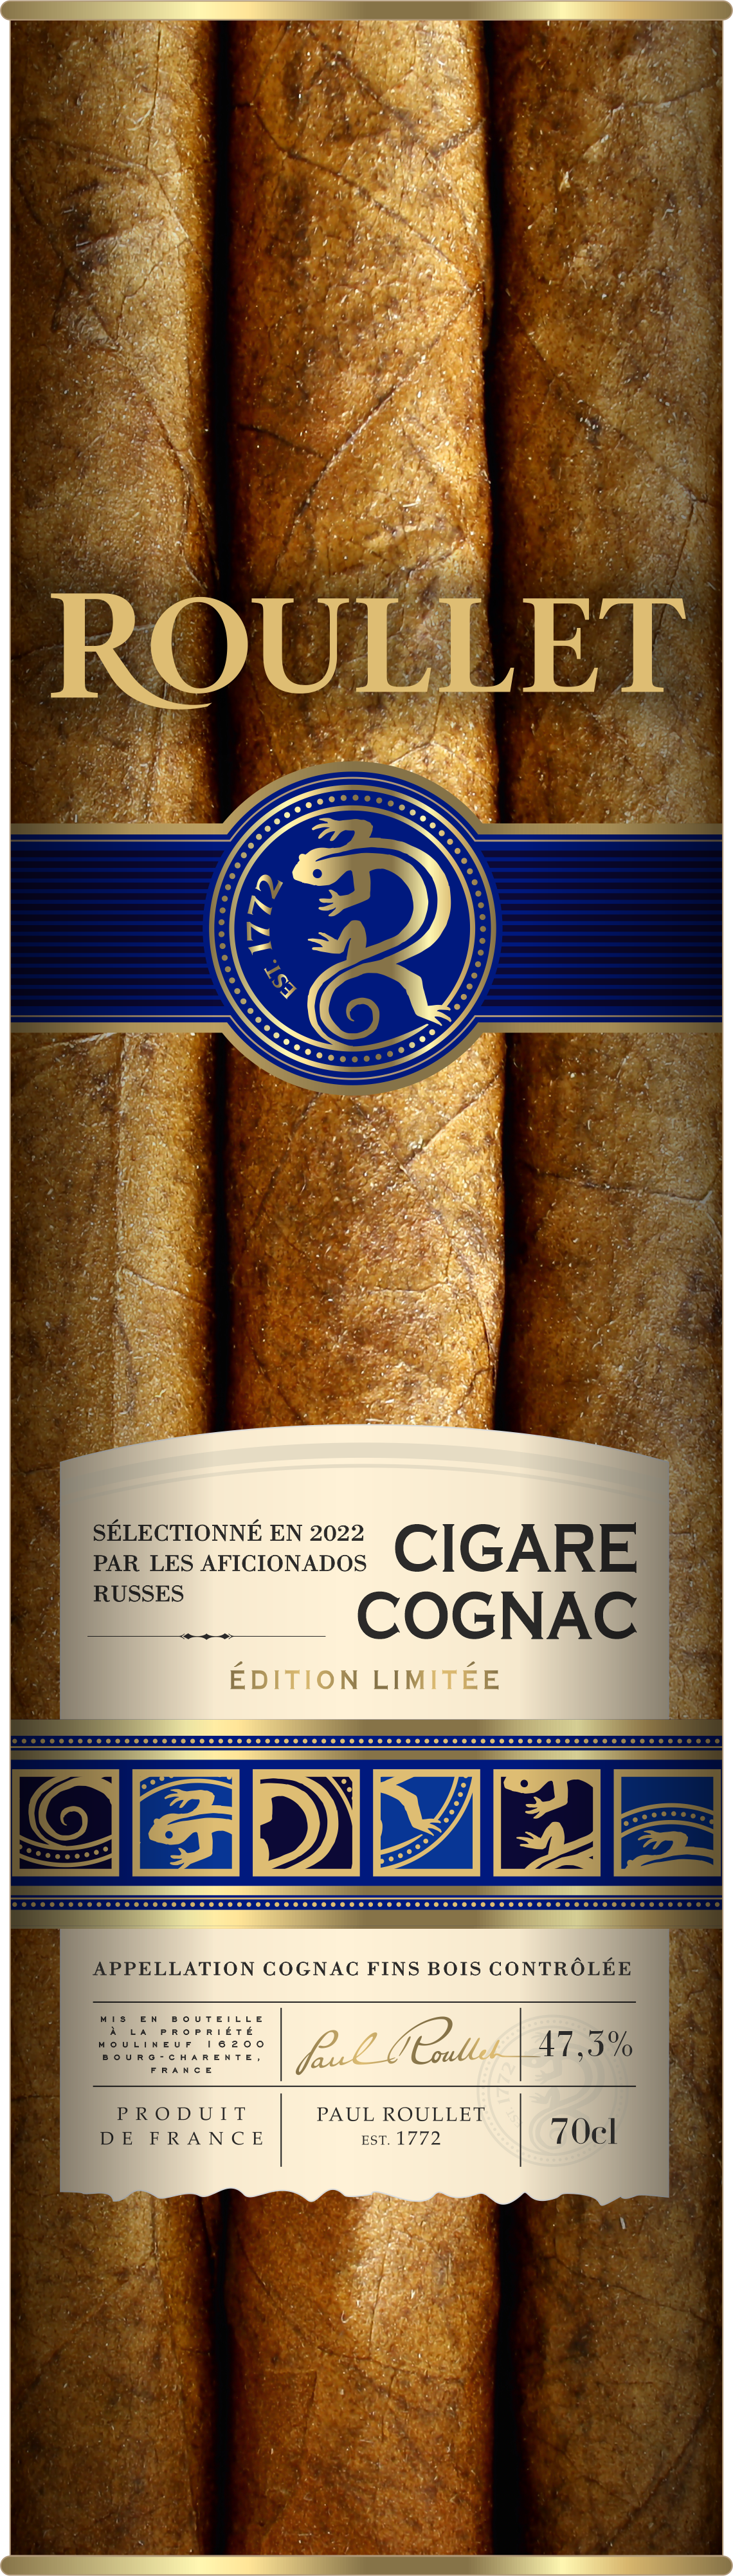 Roullet Cigare